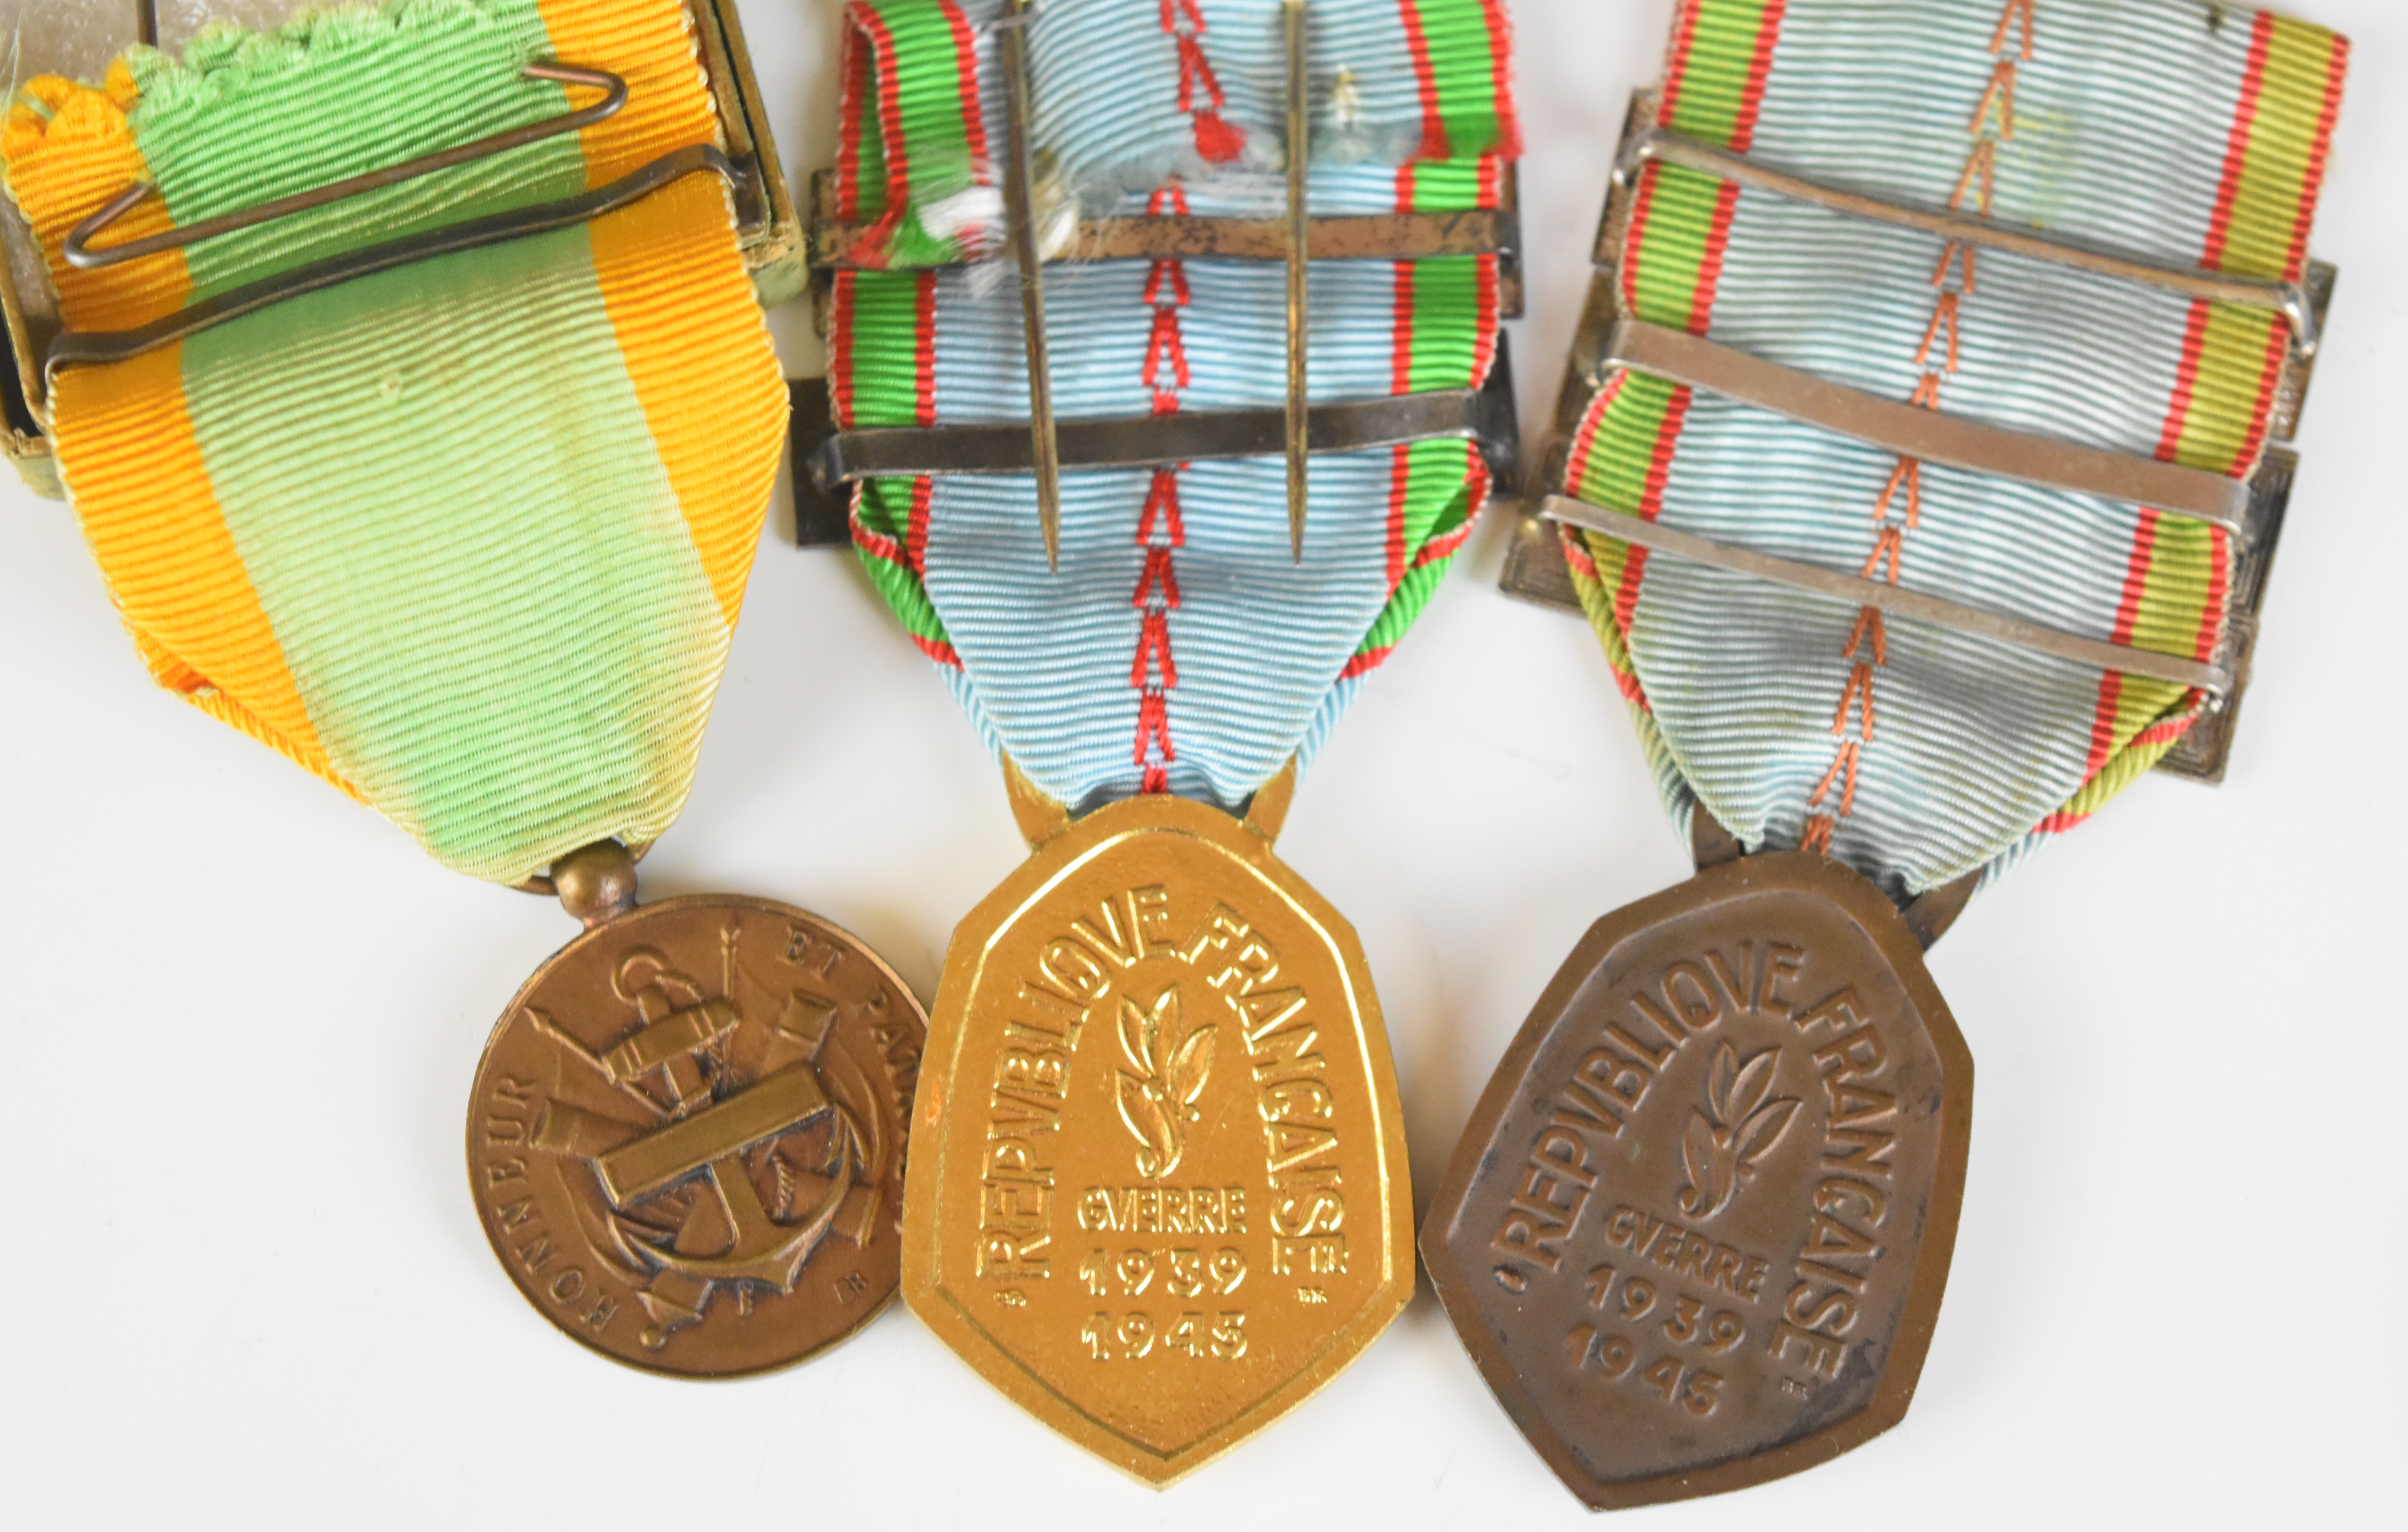 Ten French WW2 era medals including Gratitude Medal, Alsace Medal, Railway Medal, Red Cross Medal - Image 9 of 9